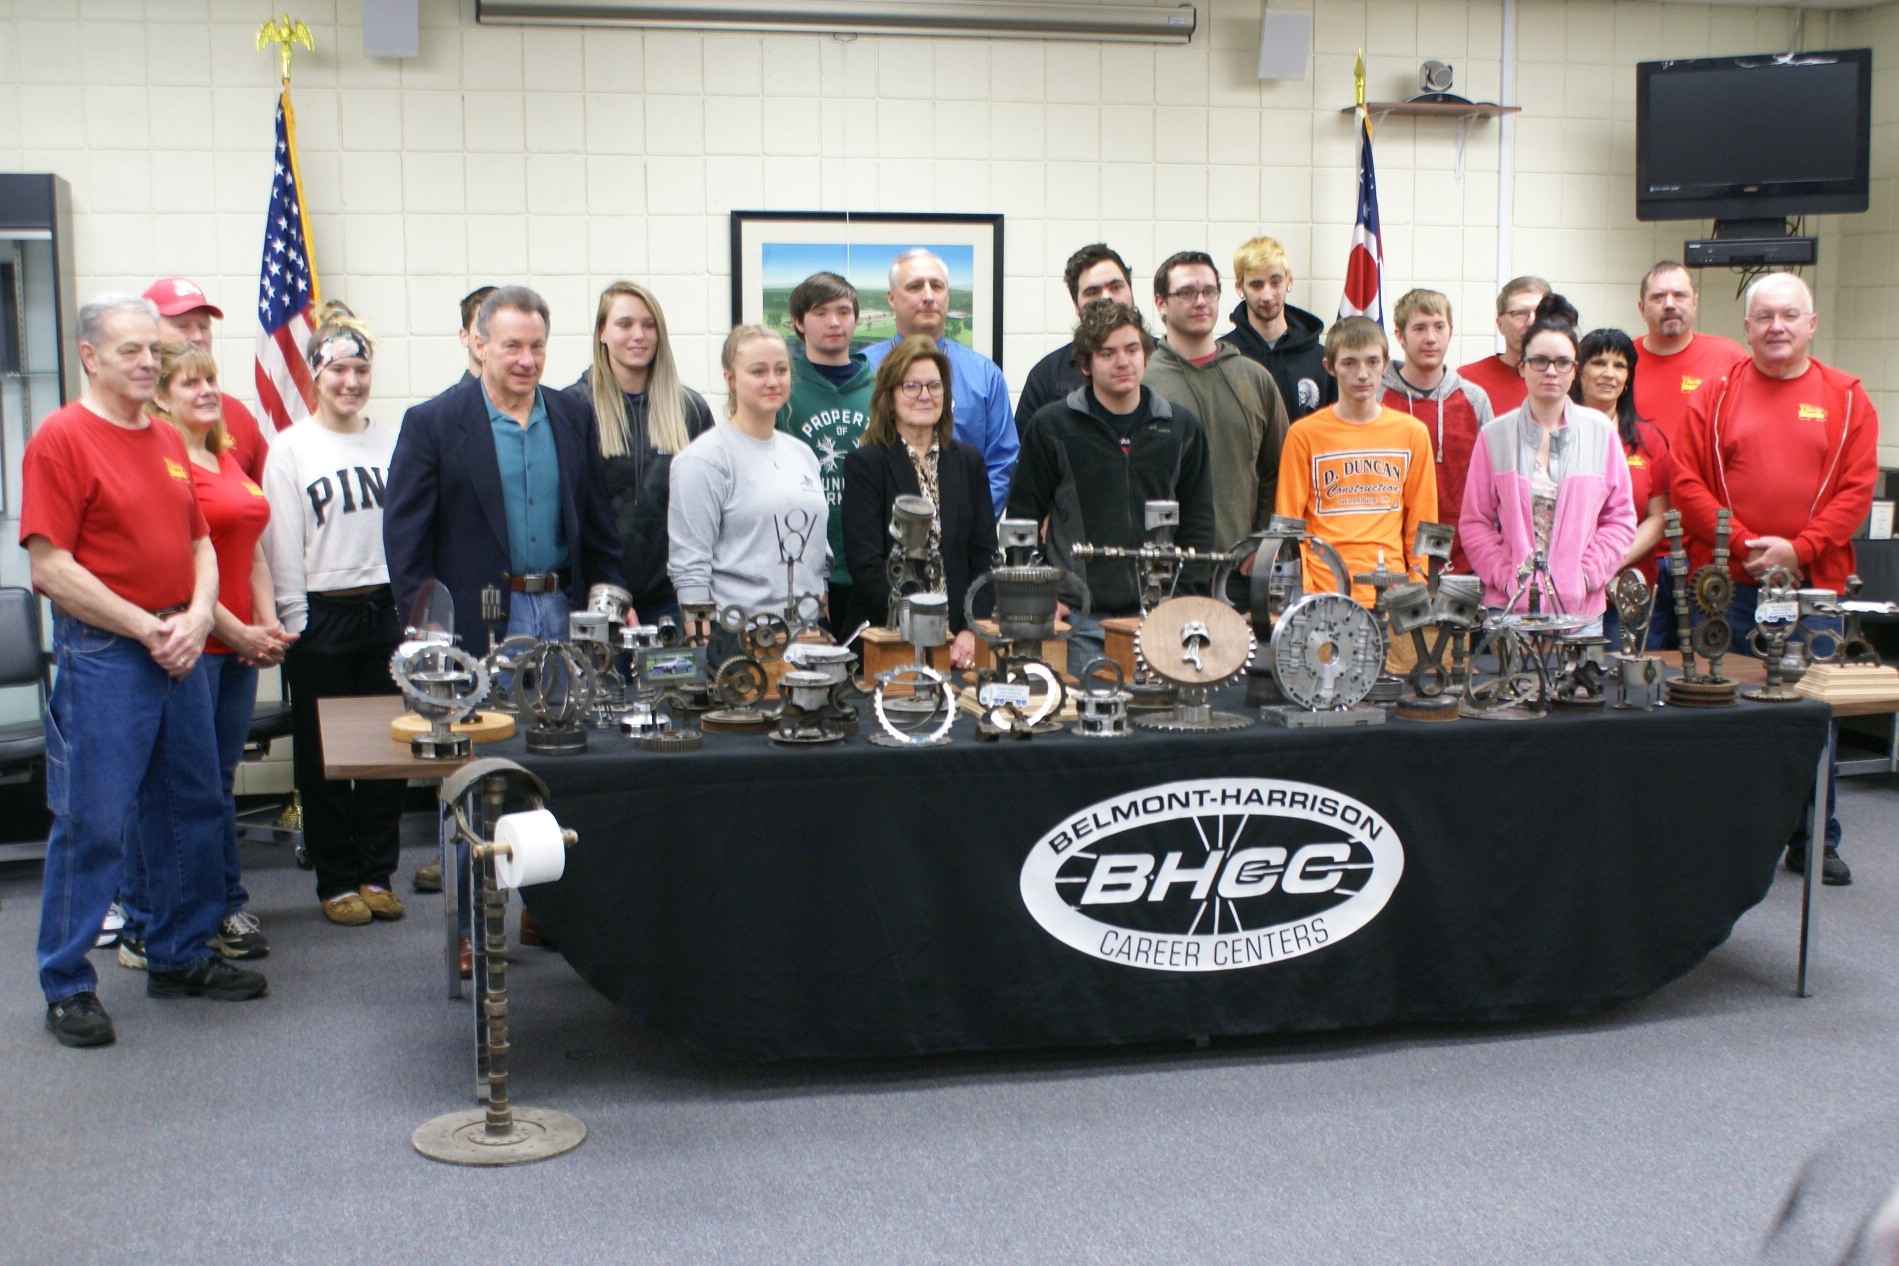 Judge Fregiato and Car Club Admire Trophies Made by Career Center Students